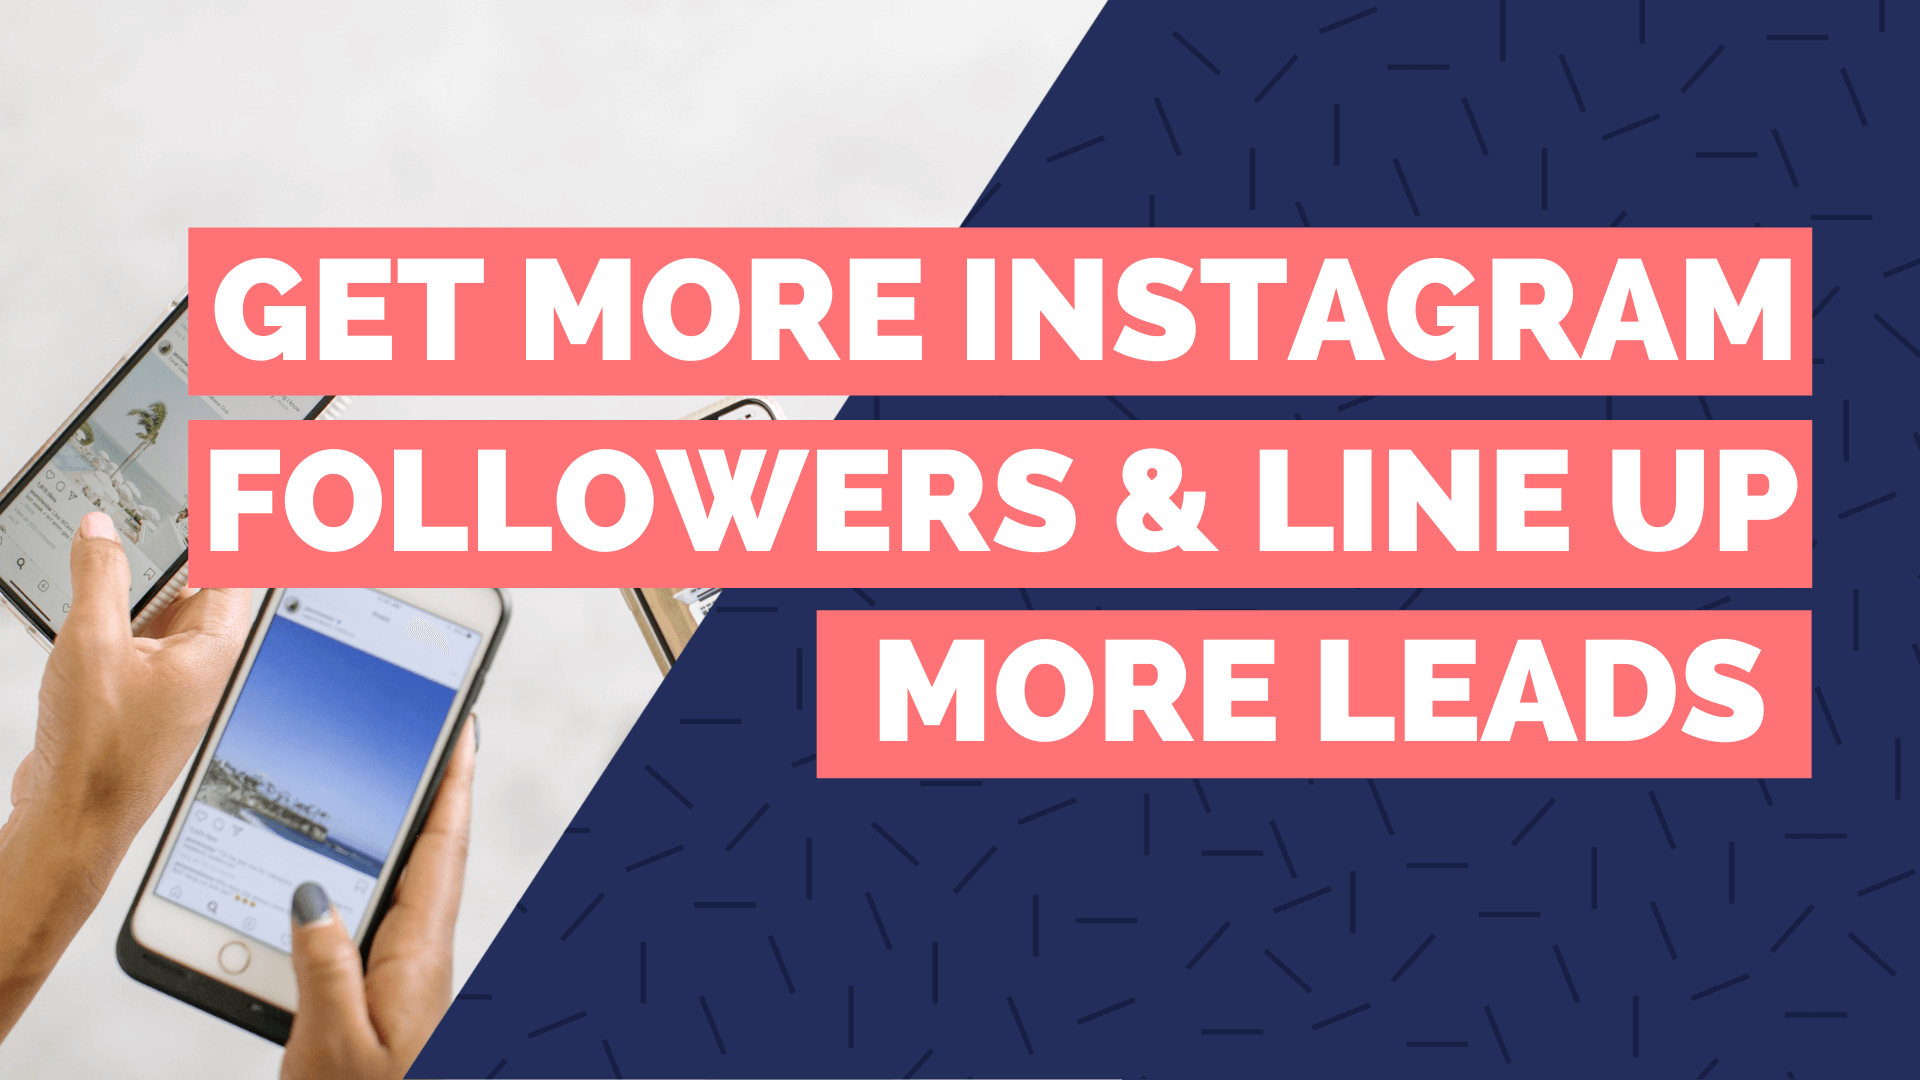 10 TIPS TO GET MORE INSTAGRAM FOLLOWERS AND LINE UP MORE LEADS FOR YOUR SOCIAL MEDIA MANAGEMENT BUSINESS.